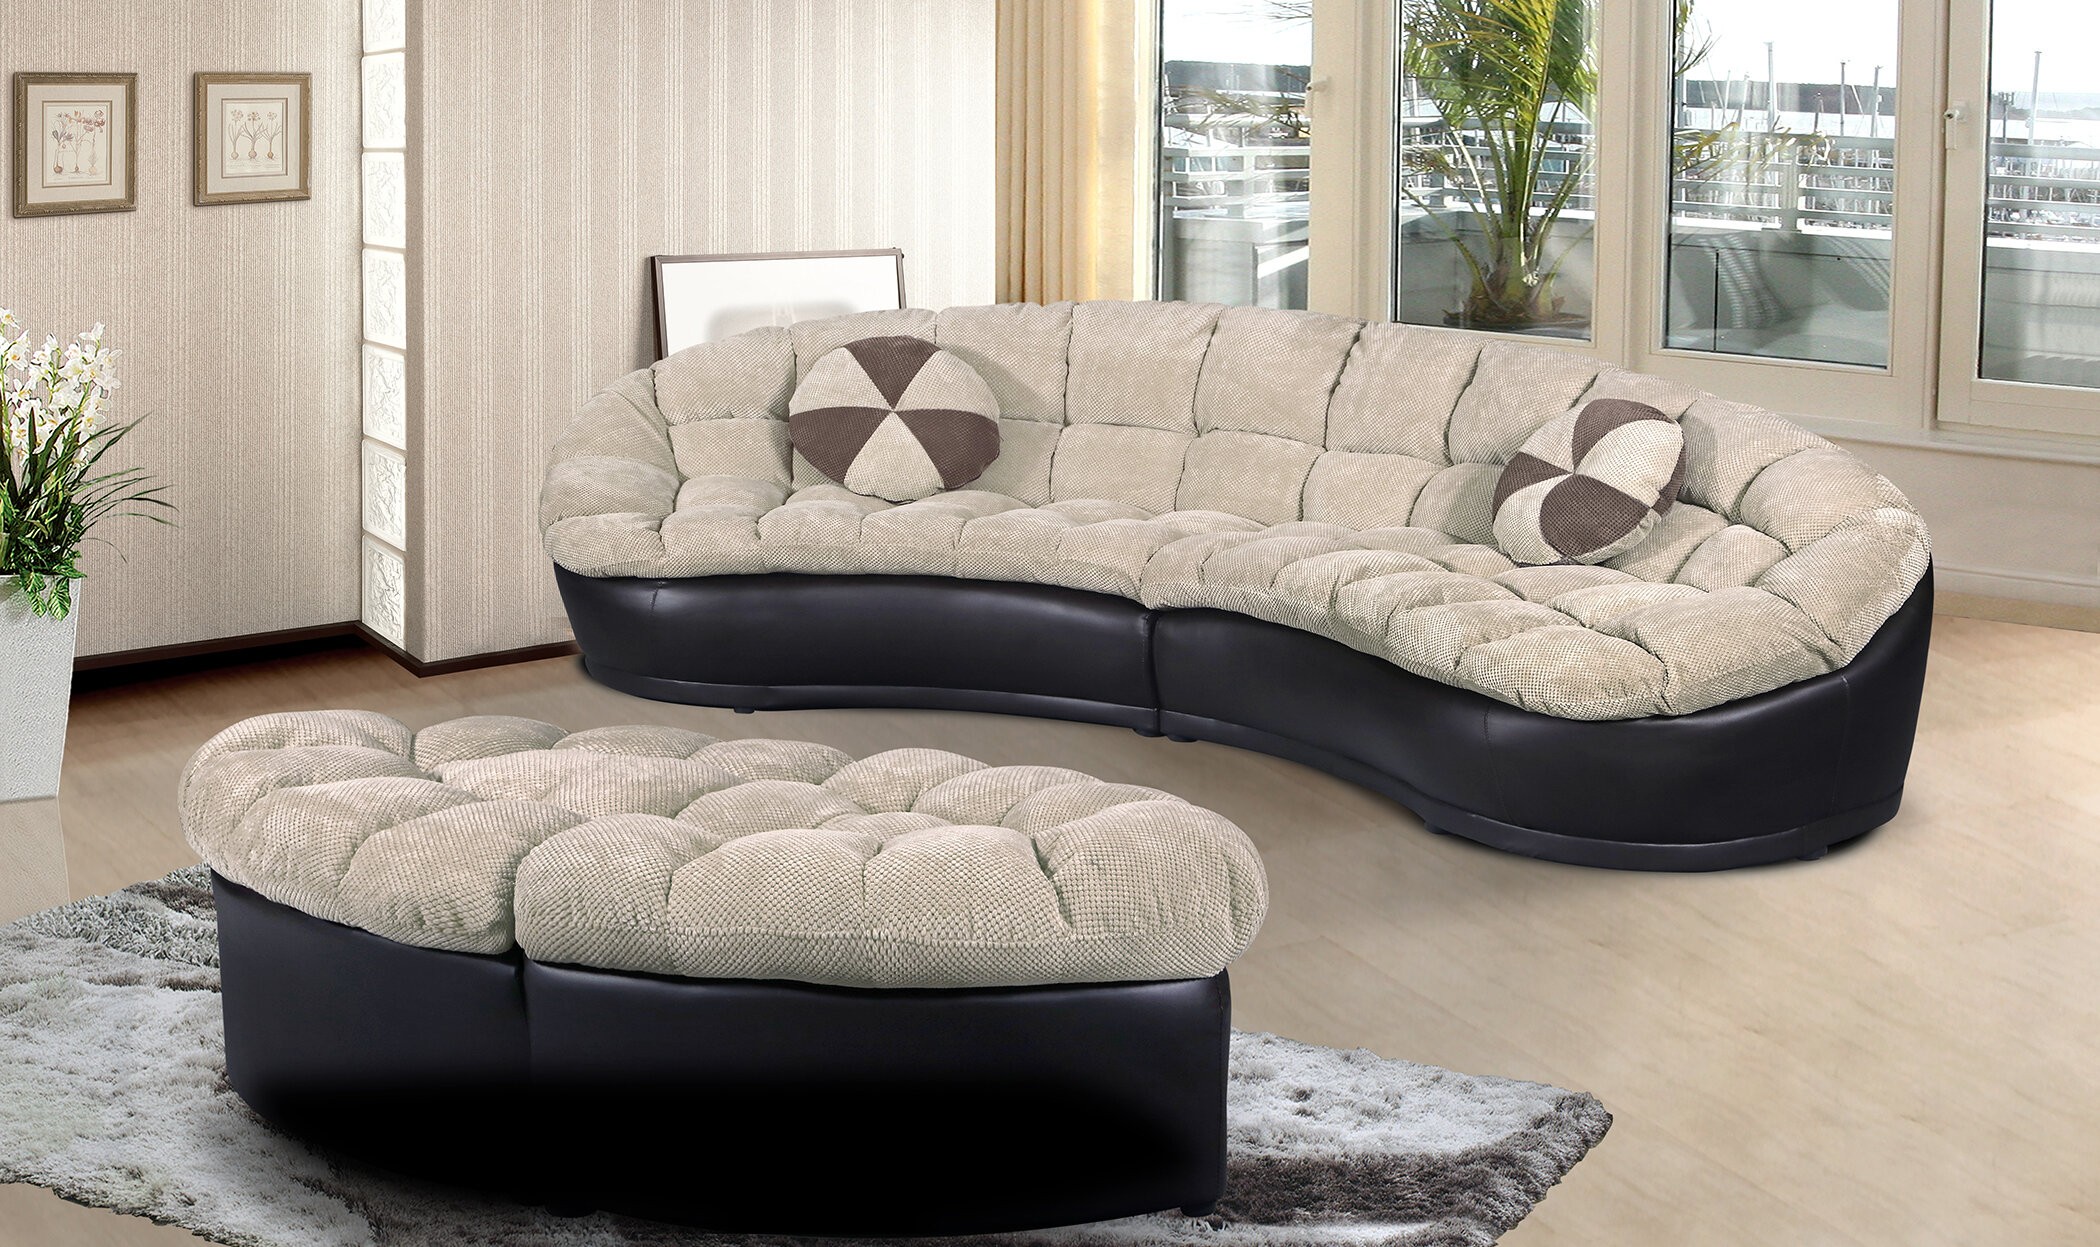 4-piece rounded sectional with ottomans